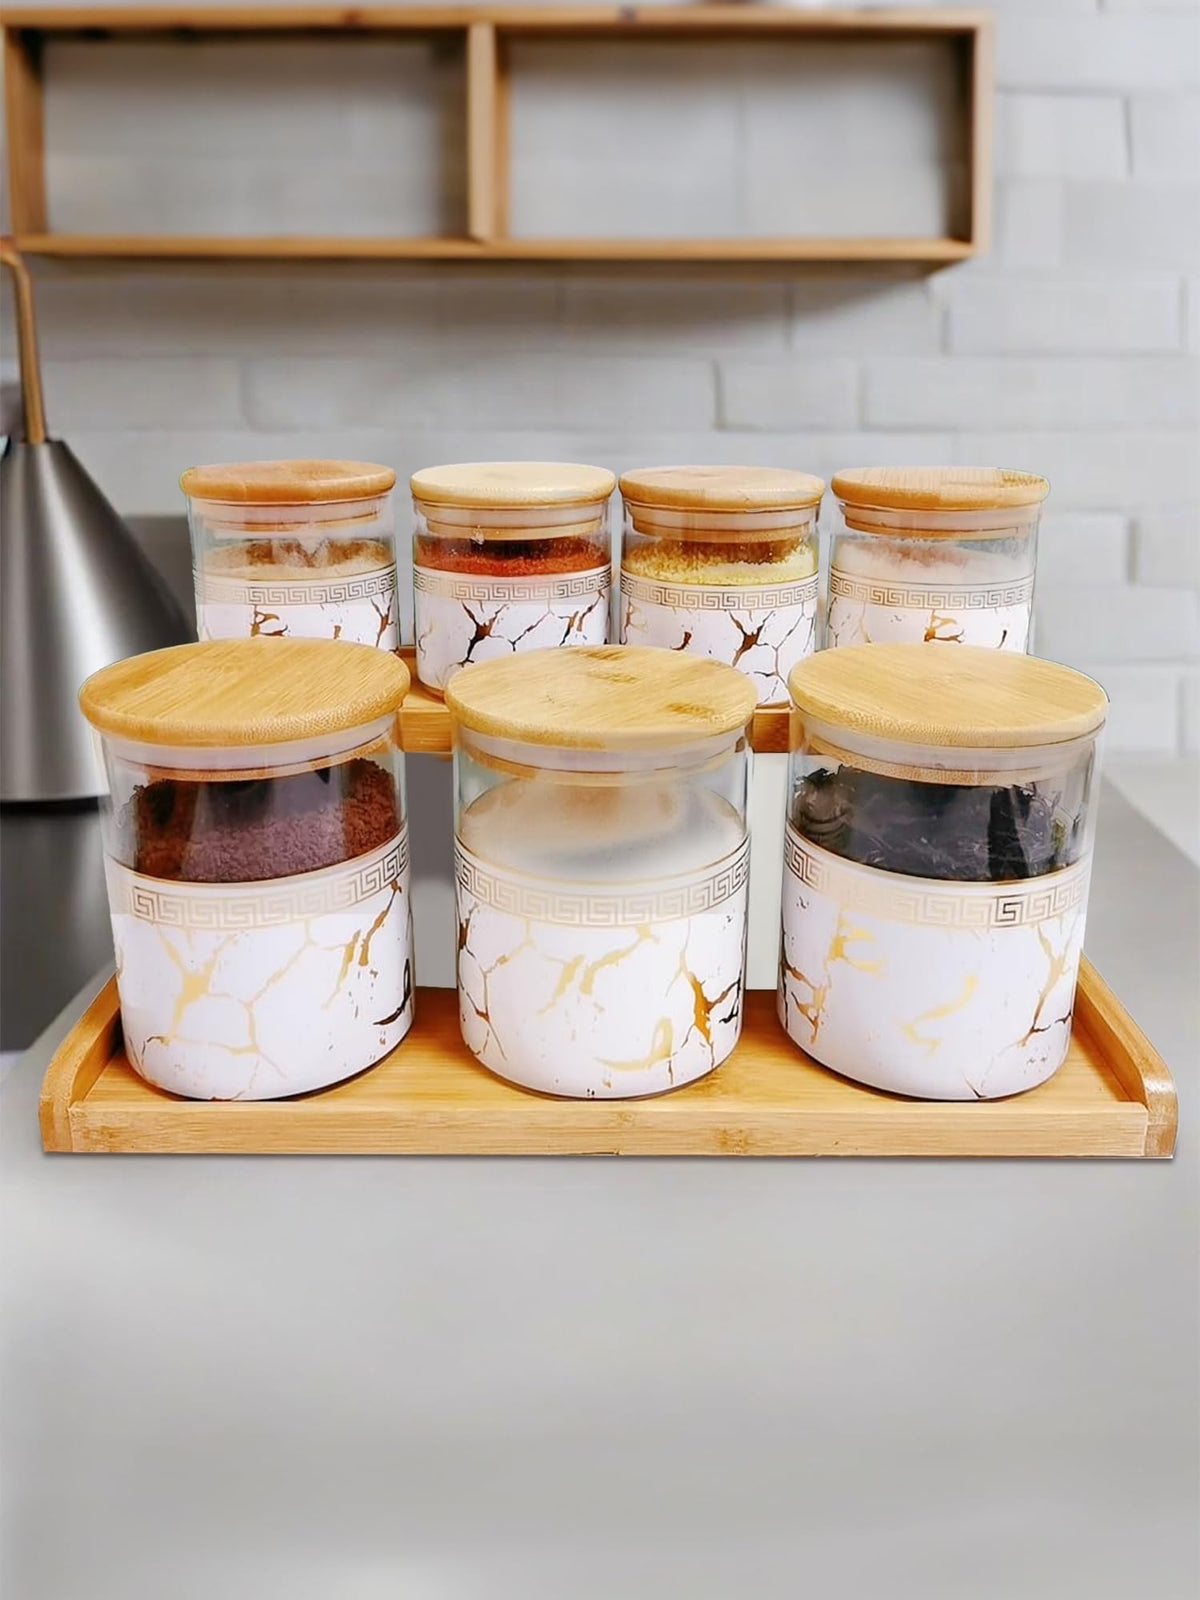 The Better Home Zenith Series Borosilicate Glass Jar With Wooden Lid (7Pcs - 850ml & 350ml)|Borosilicate Glass Container|Storage Set | Airtight Glass Container | Spice Jars For Kitchen (White Printed)